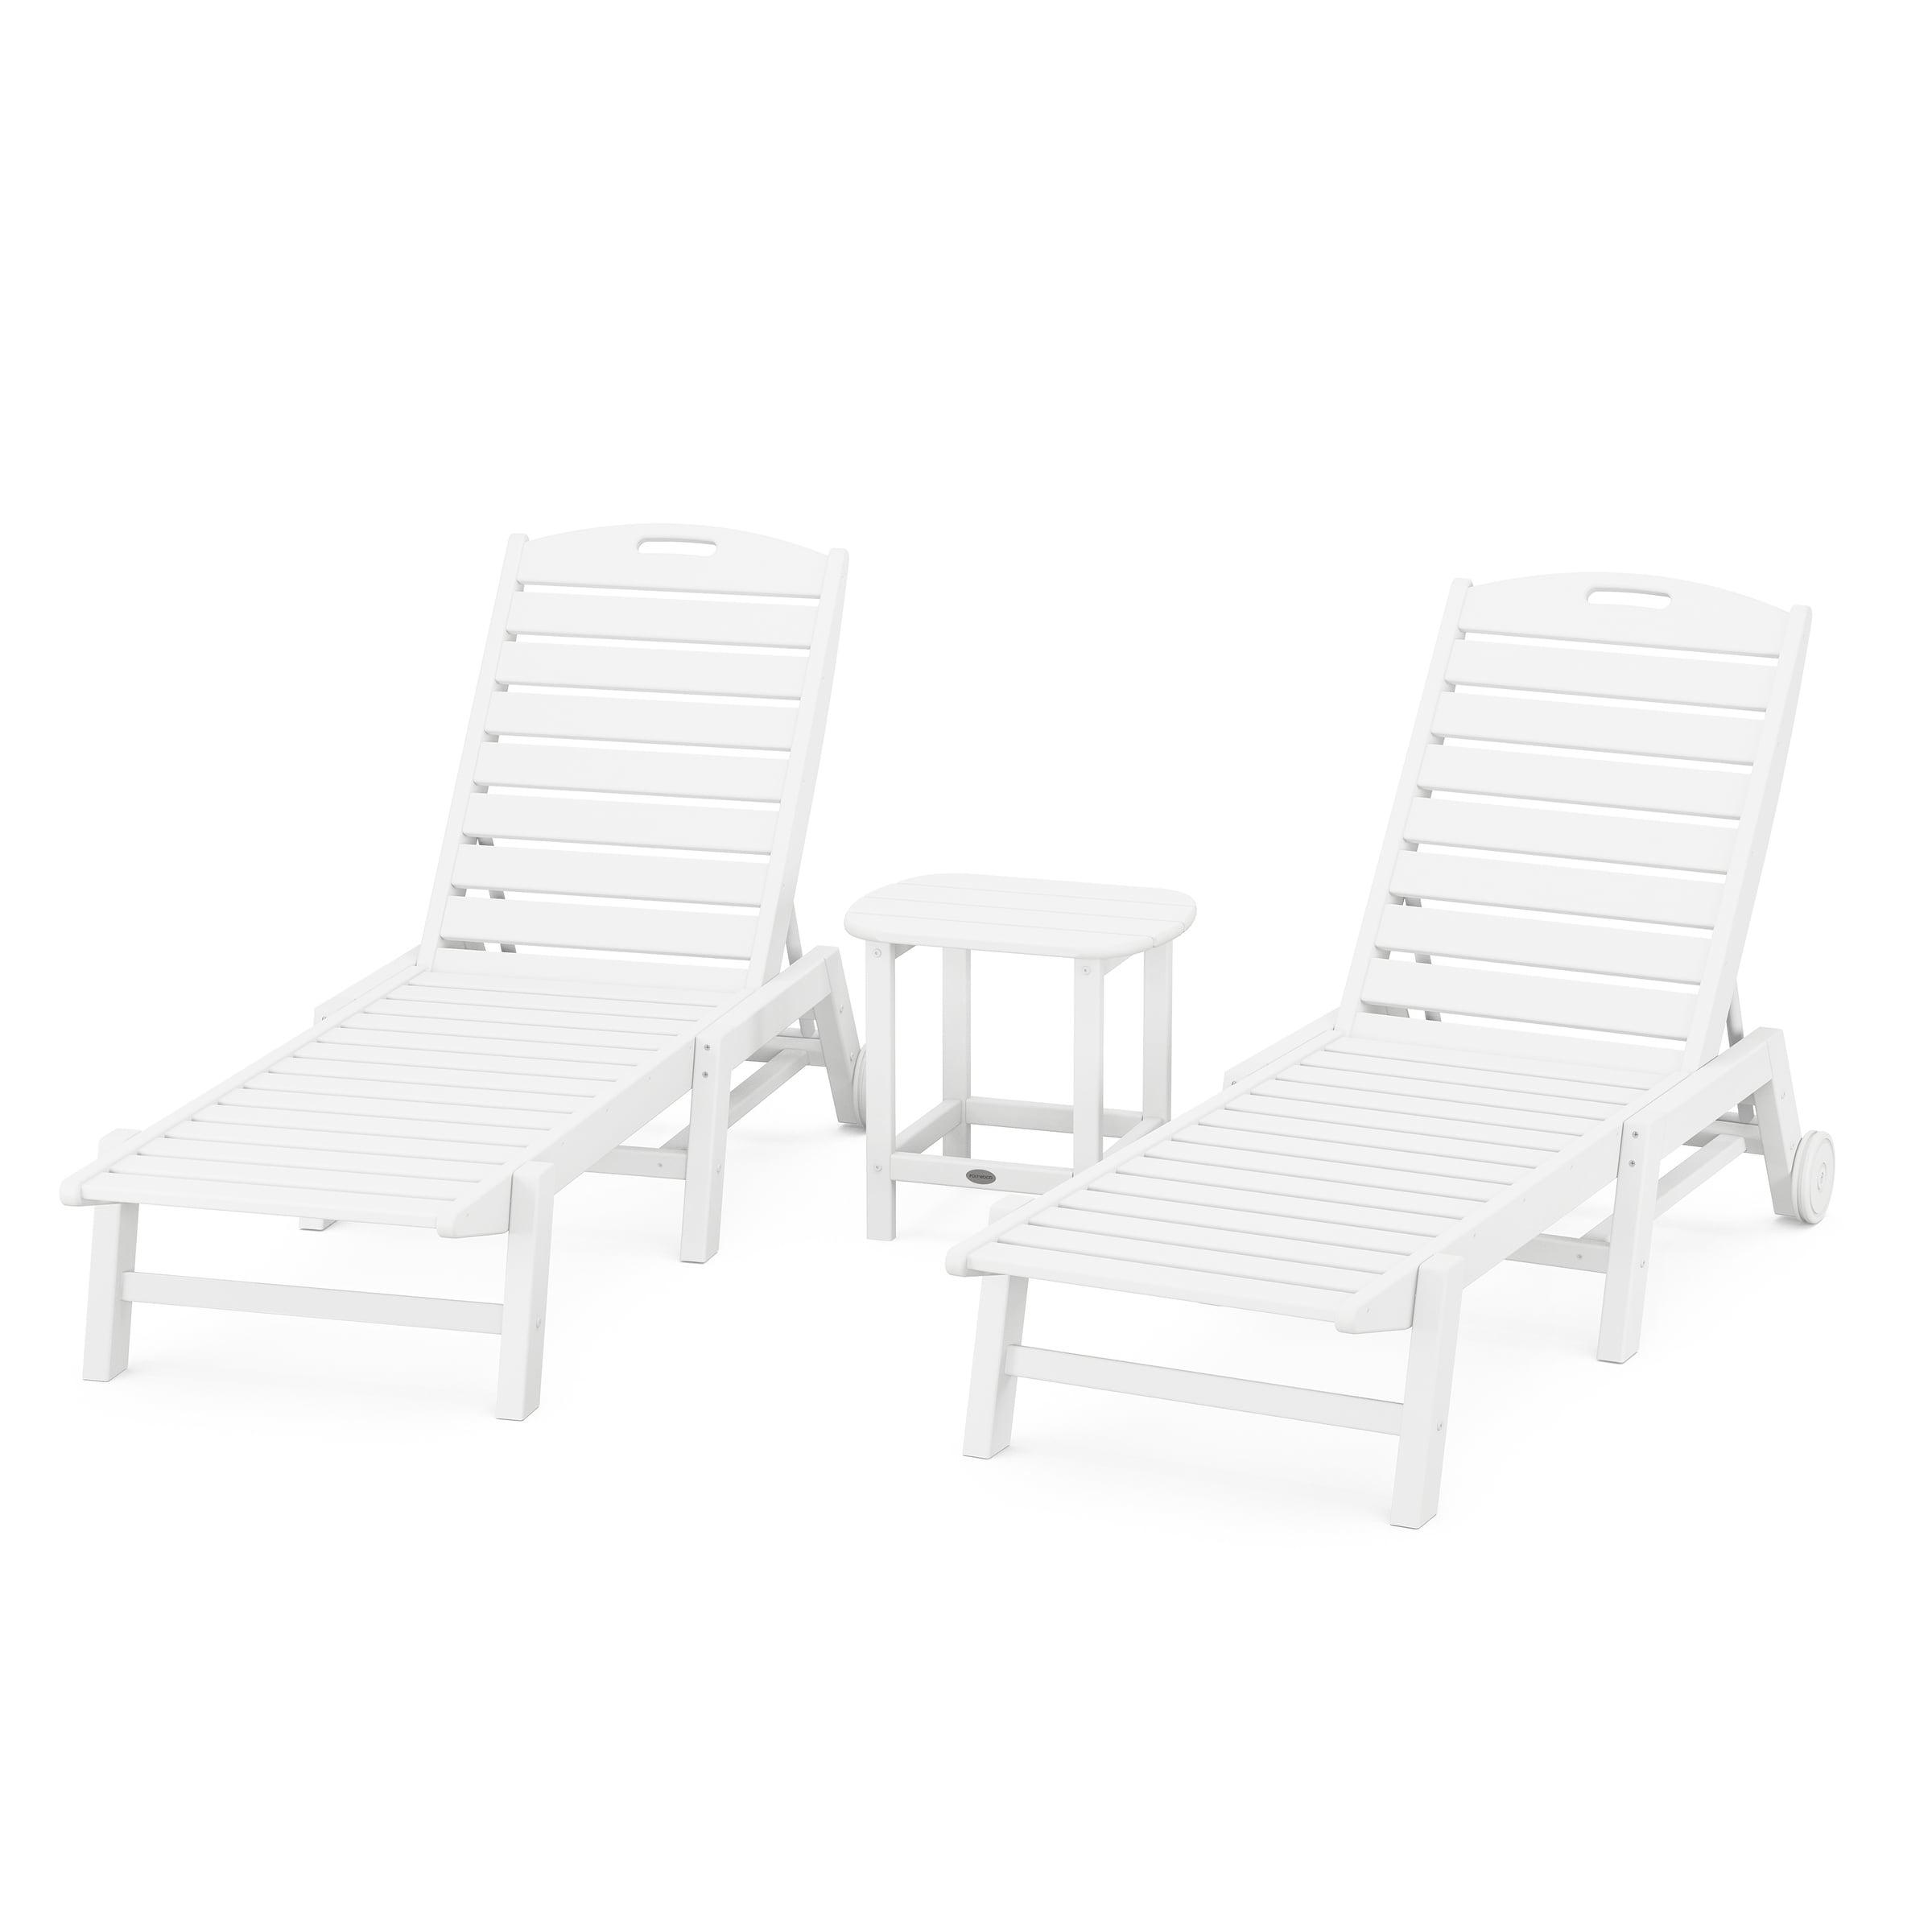 Polywood Nautical 3-piece Chaise Lounge With Wheels Set With South Beach 18 Side Table - N/a